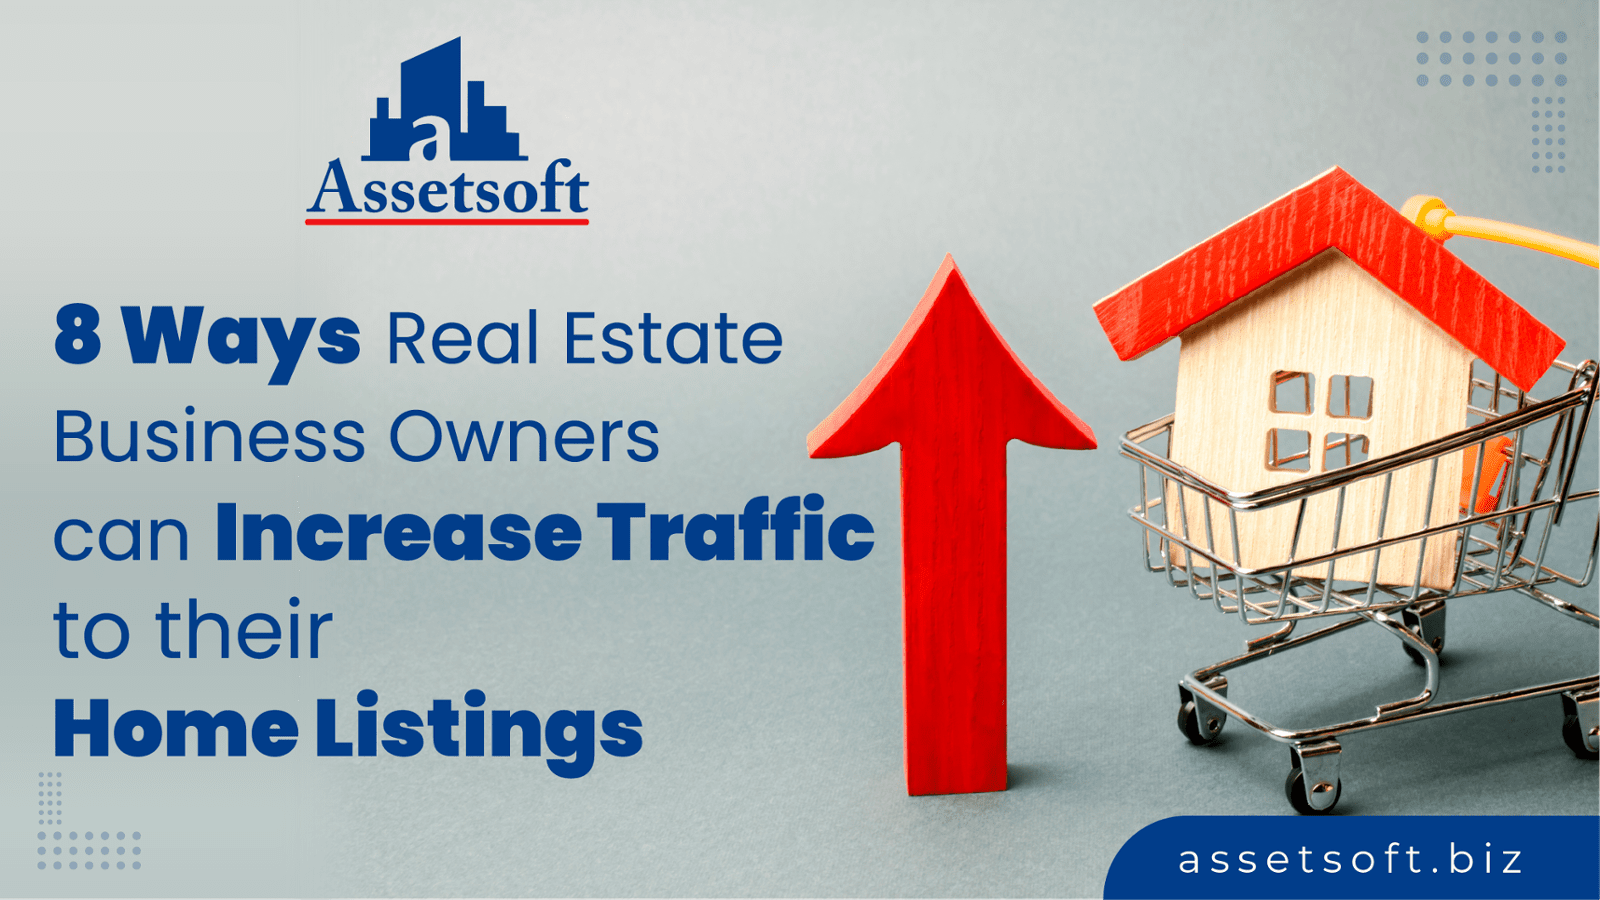 8 Ways Real Estate Business Owners can Increase Traffic to their Home Listings 